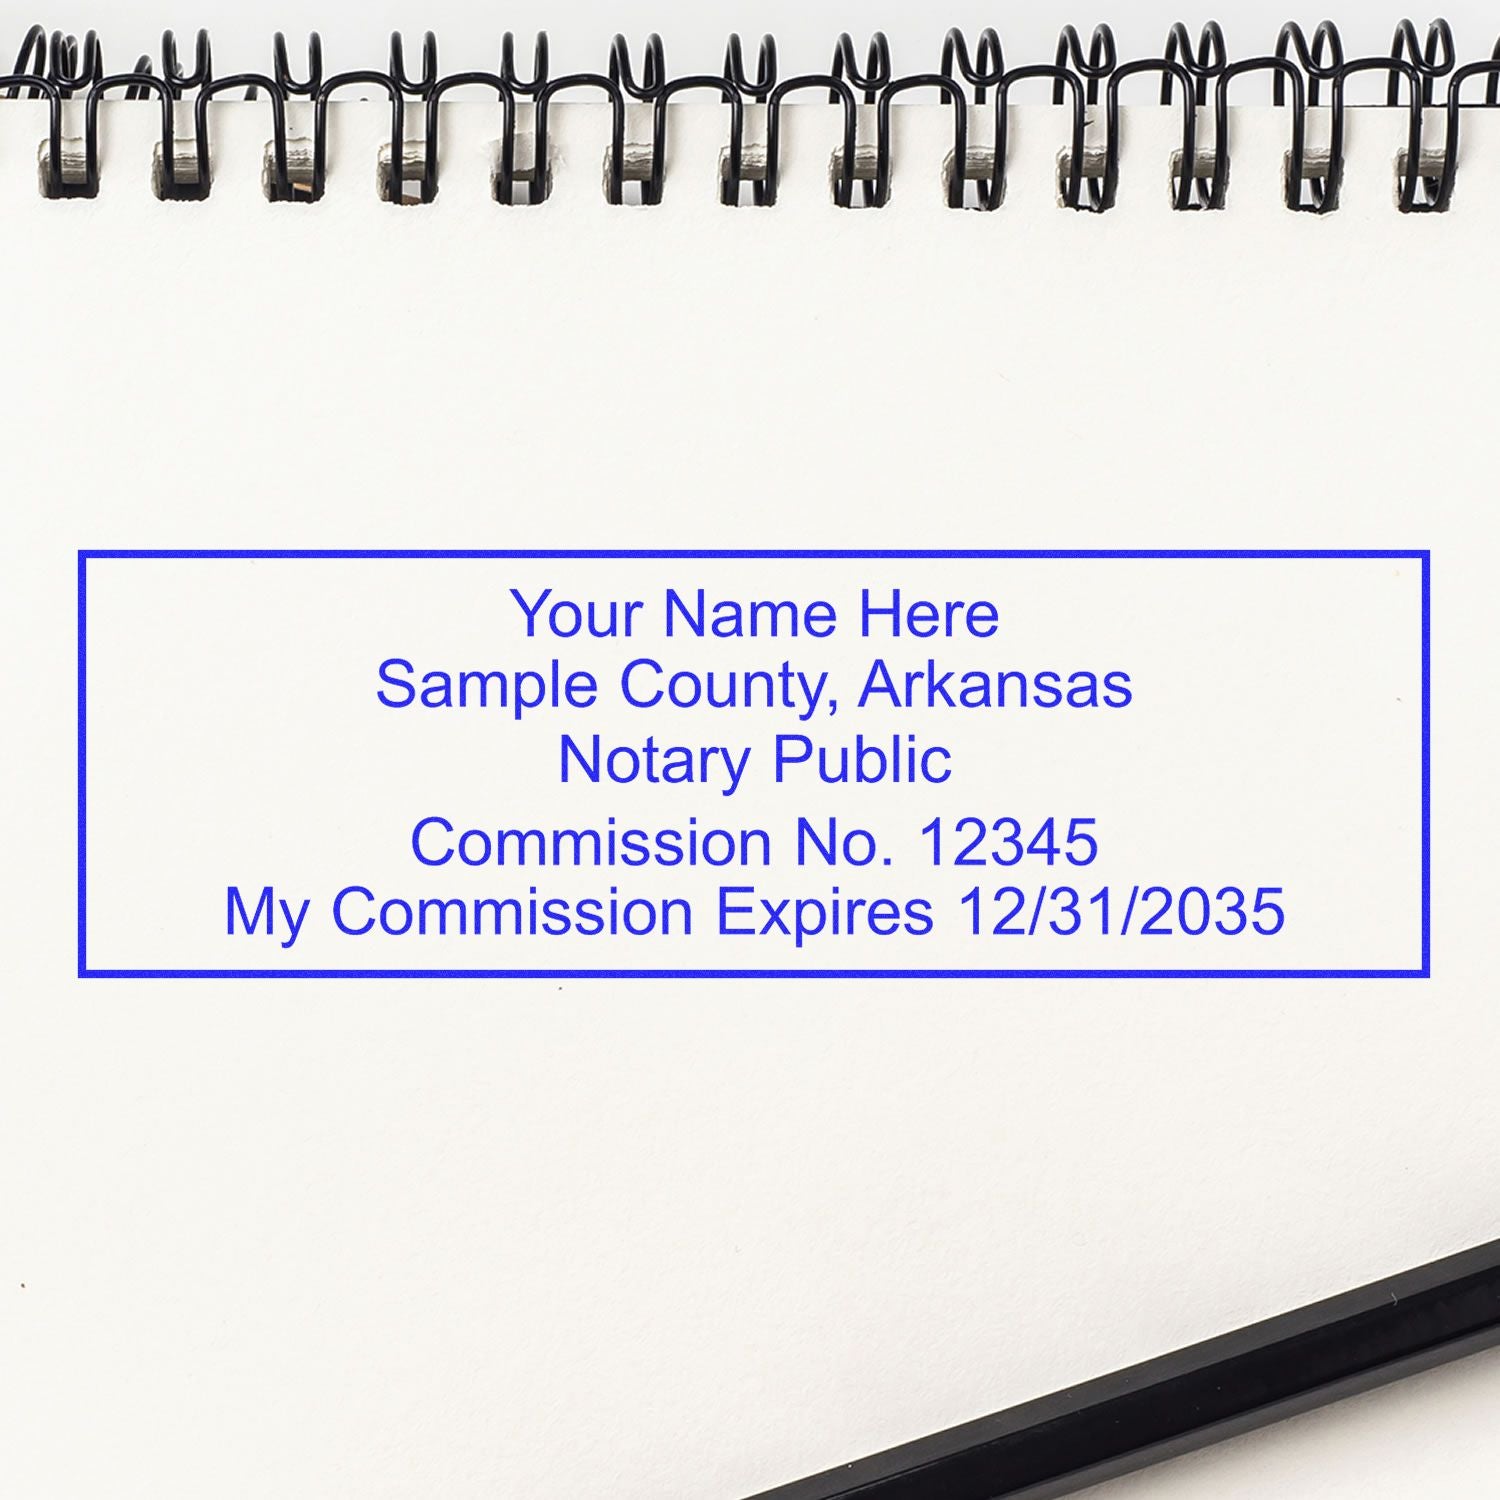 The main image for the PSI Arkansas Notary Stamp depicting a sample of the imprint and electronic files